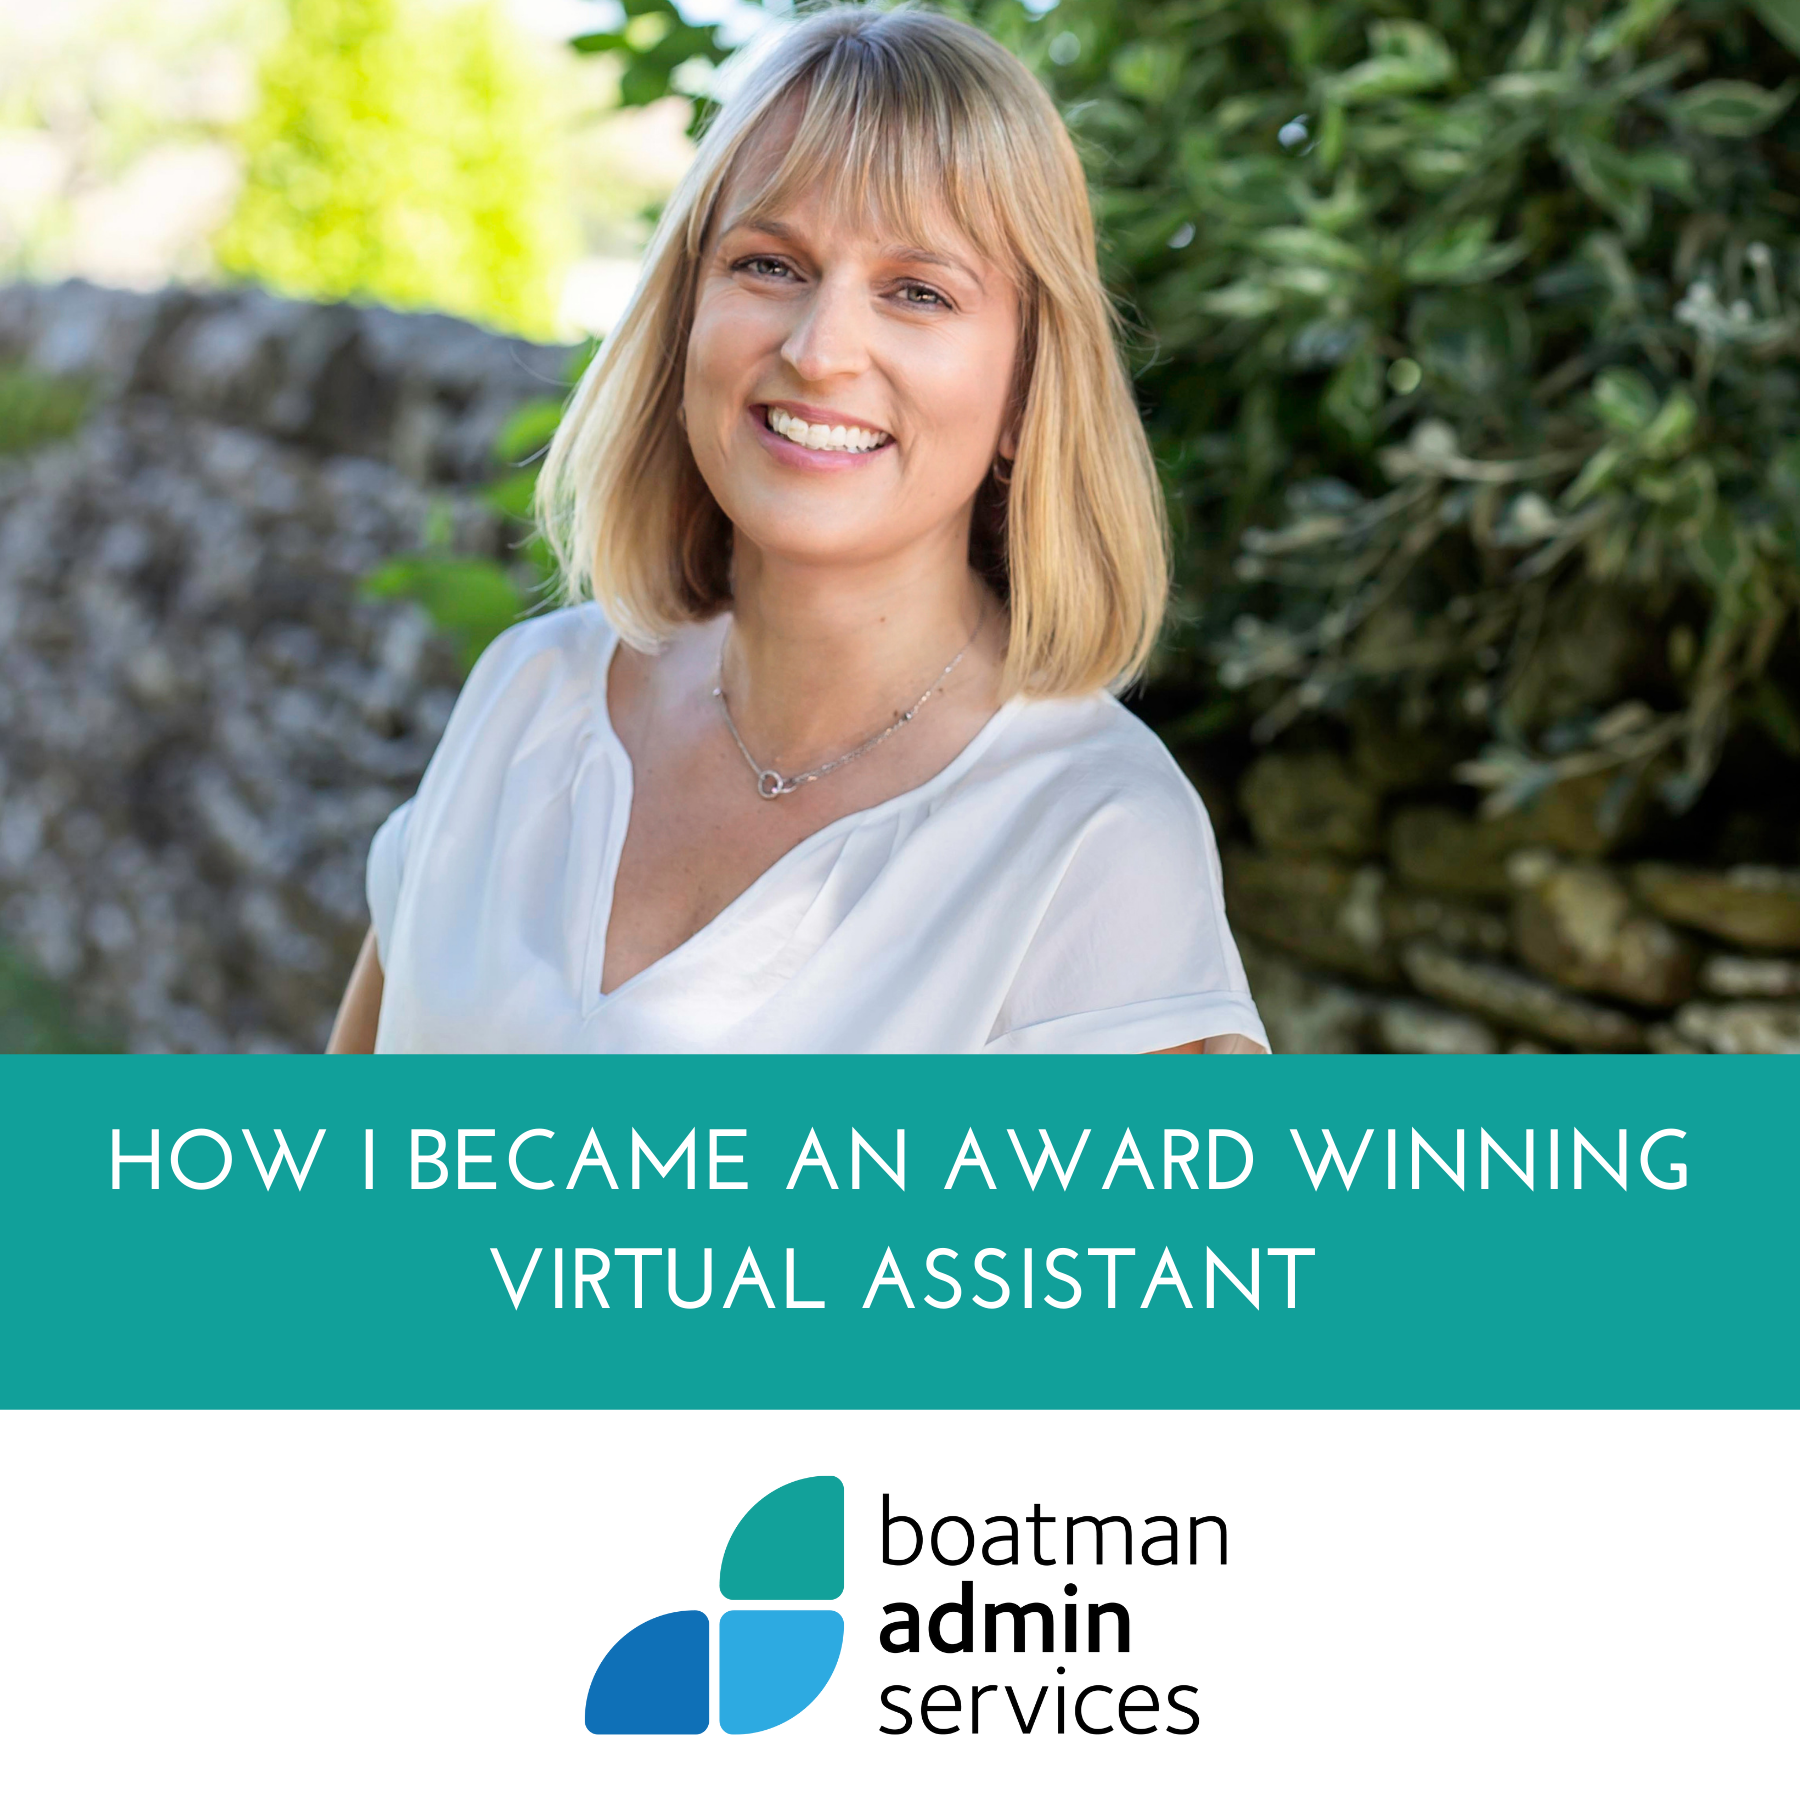 How I became an Award Winning Virtual Assistant